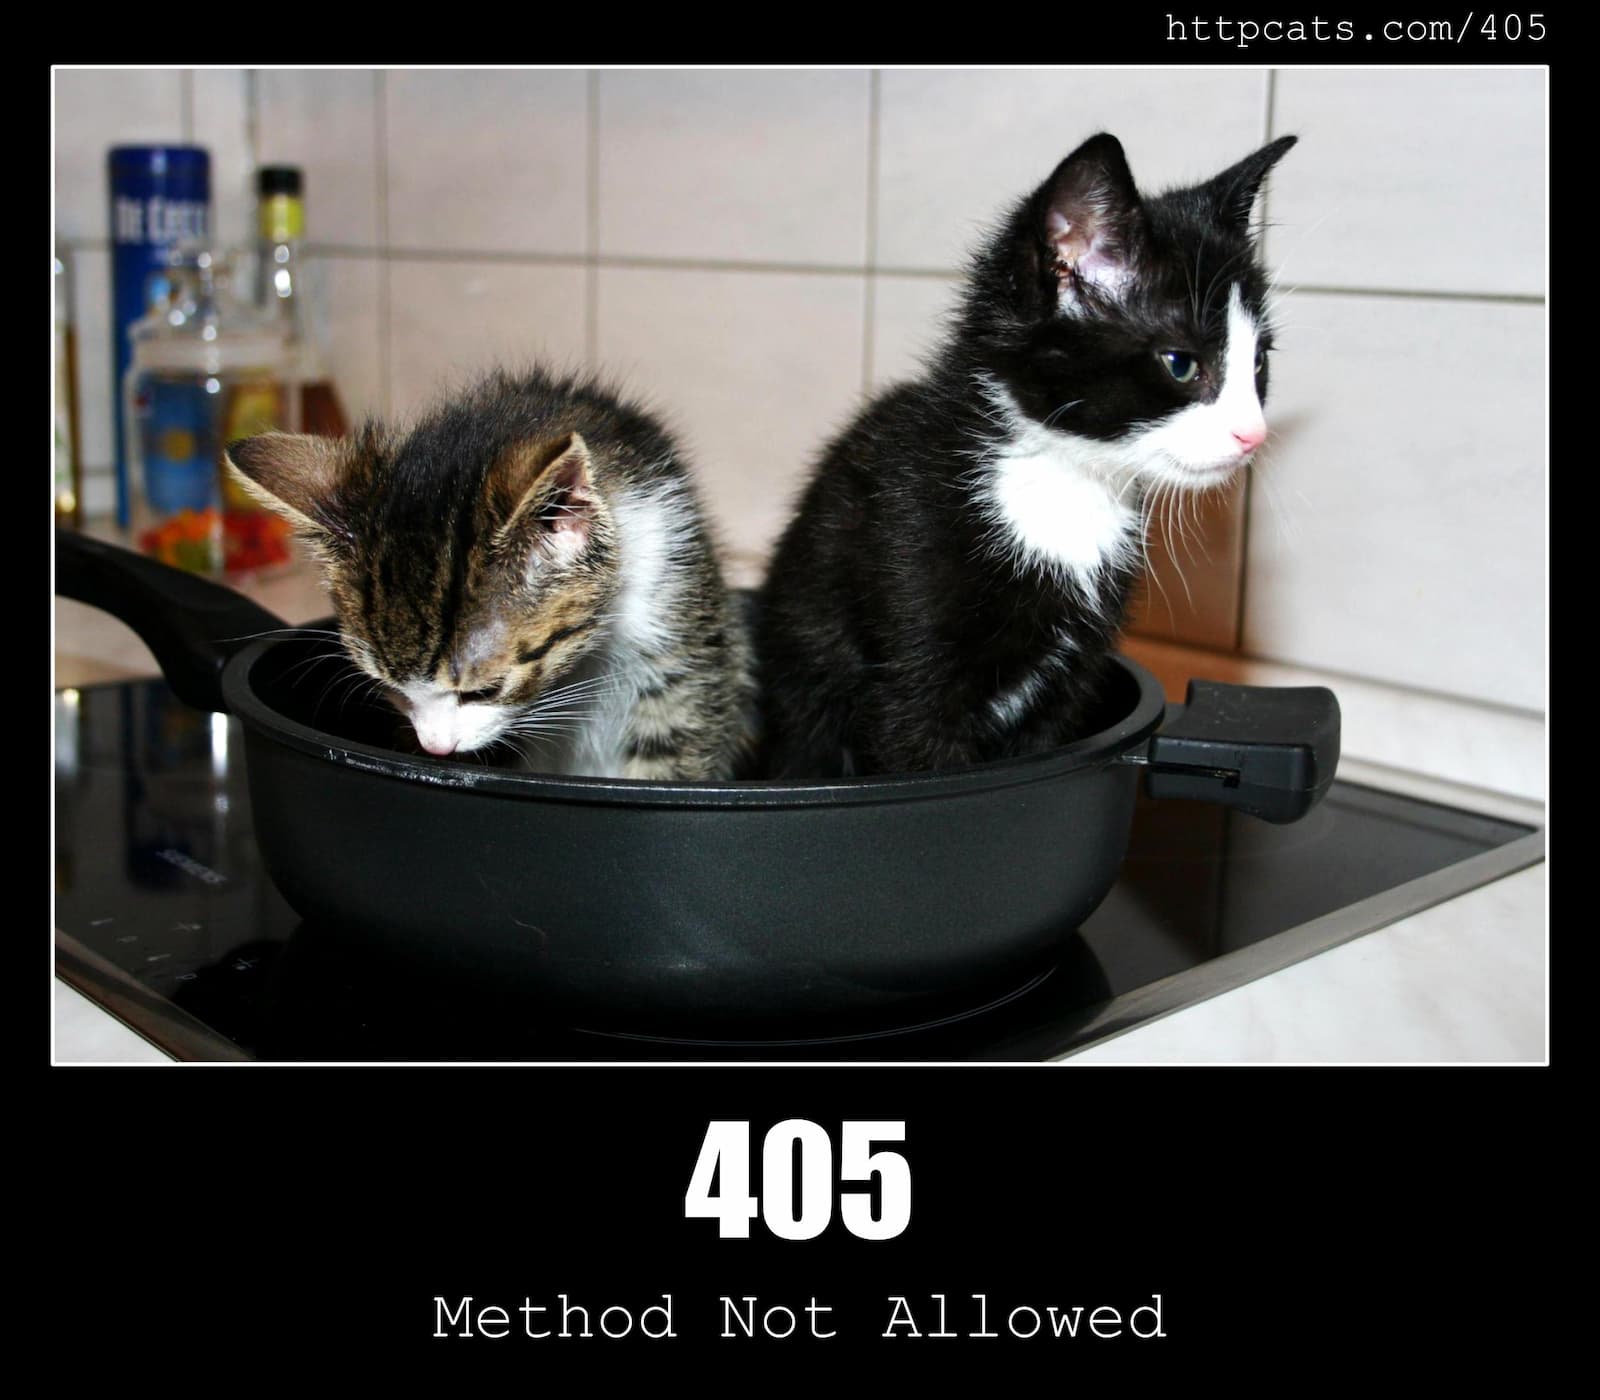 HTTP Status Code 405 Method Not Allowed & Cats